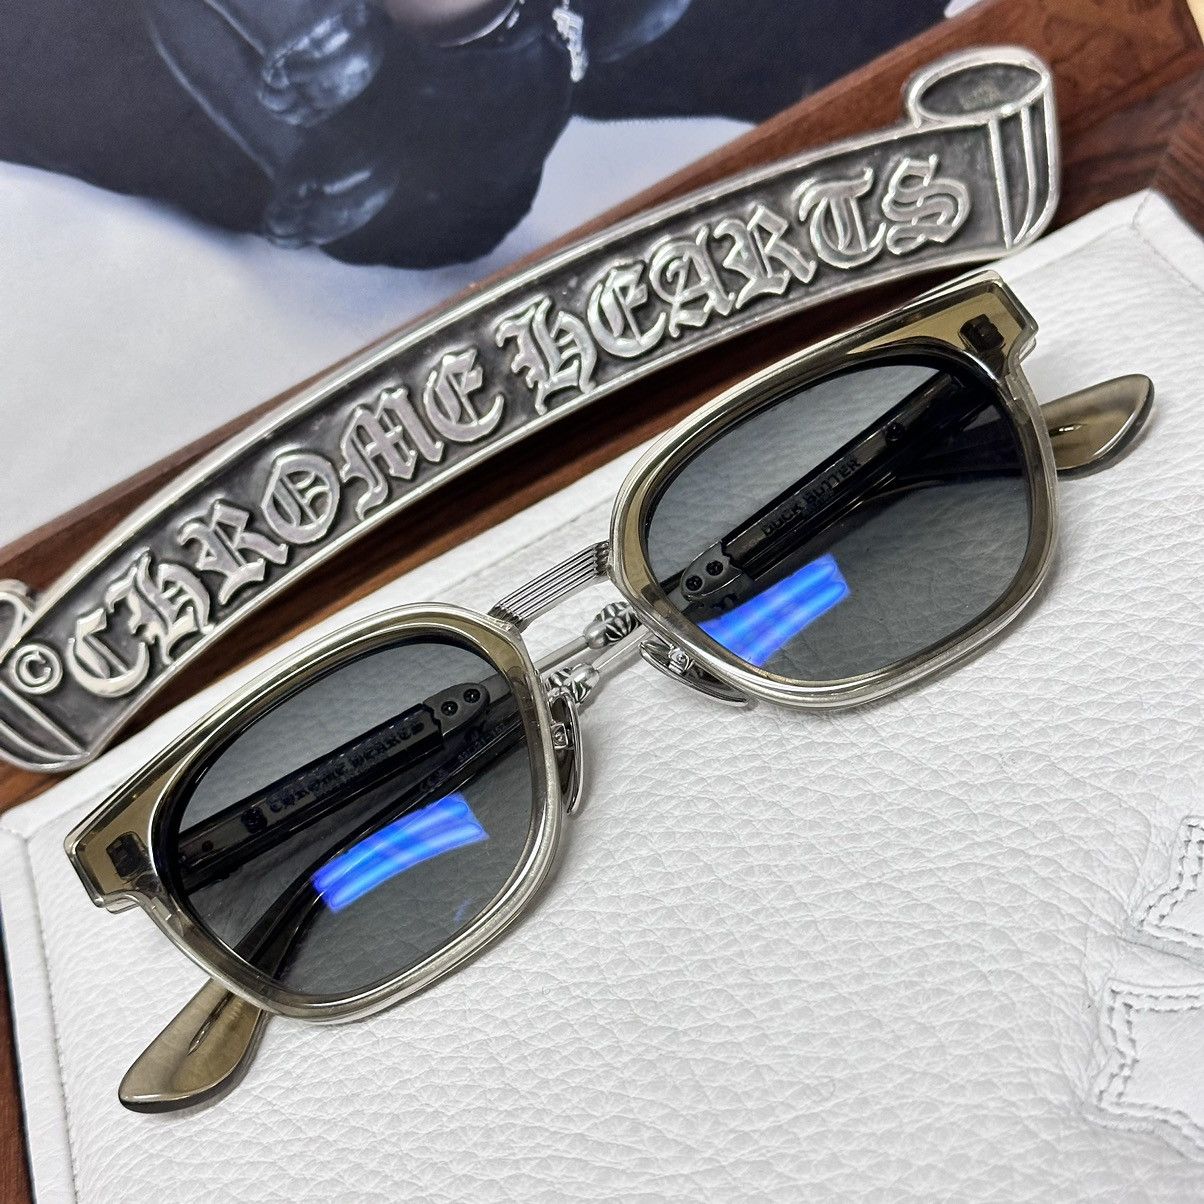 Chrome Hearts Duck Butter | Grailed